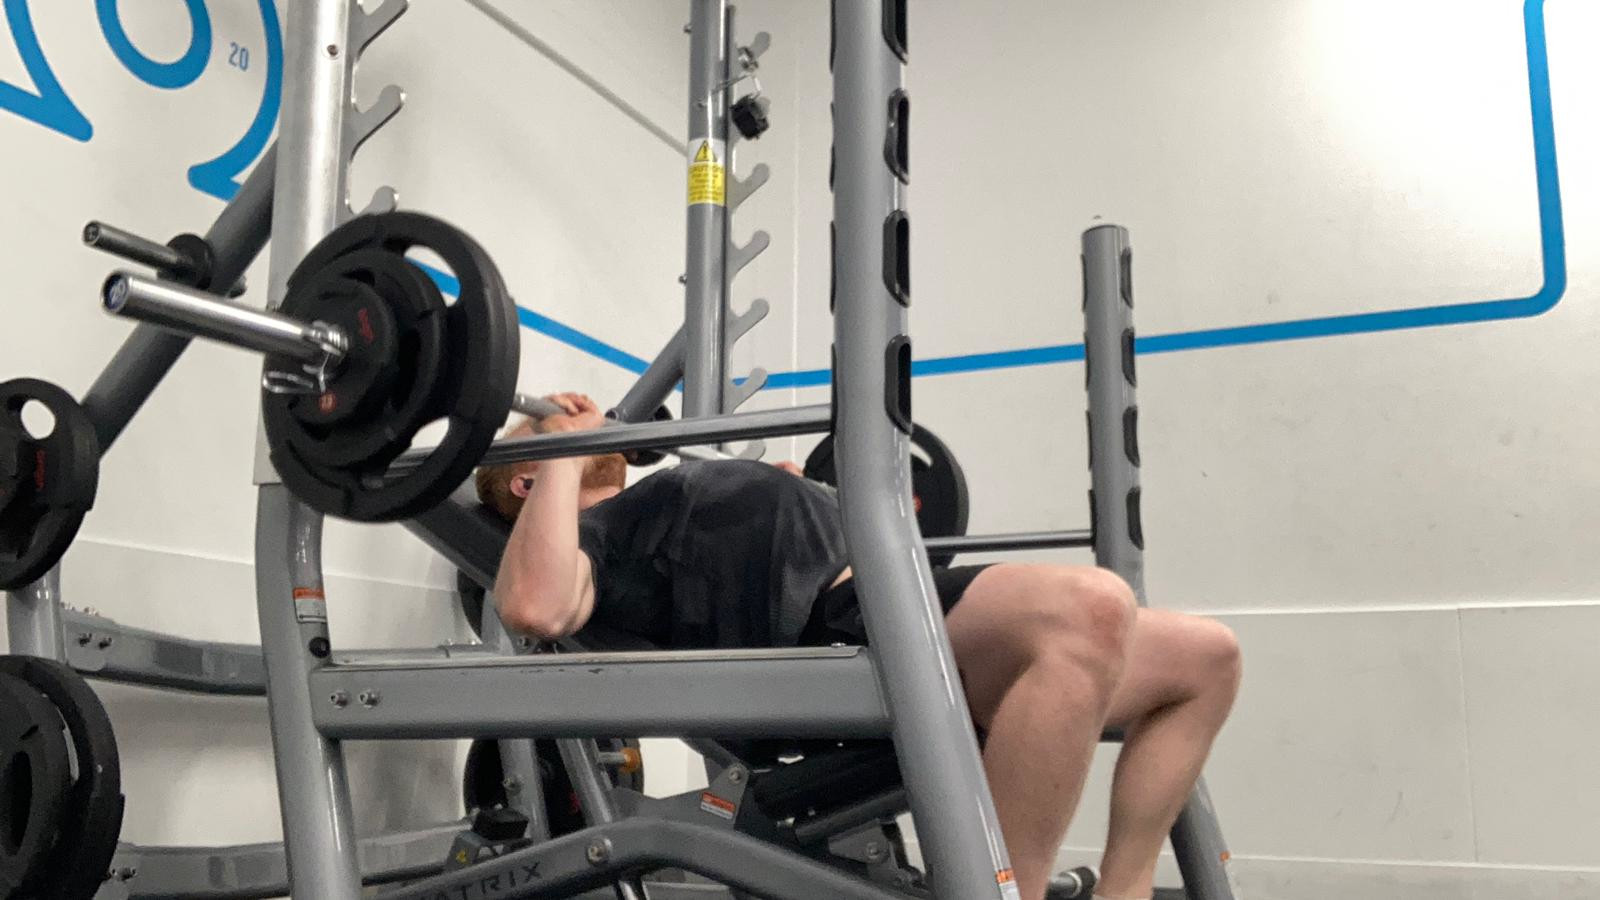 The author performs an incline bench press